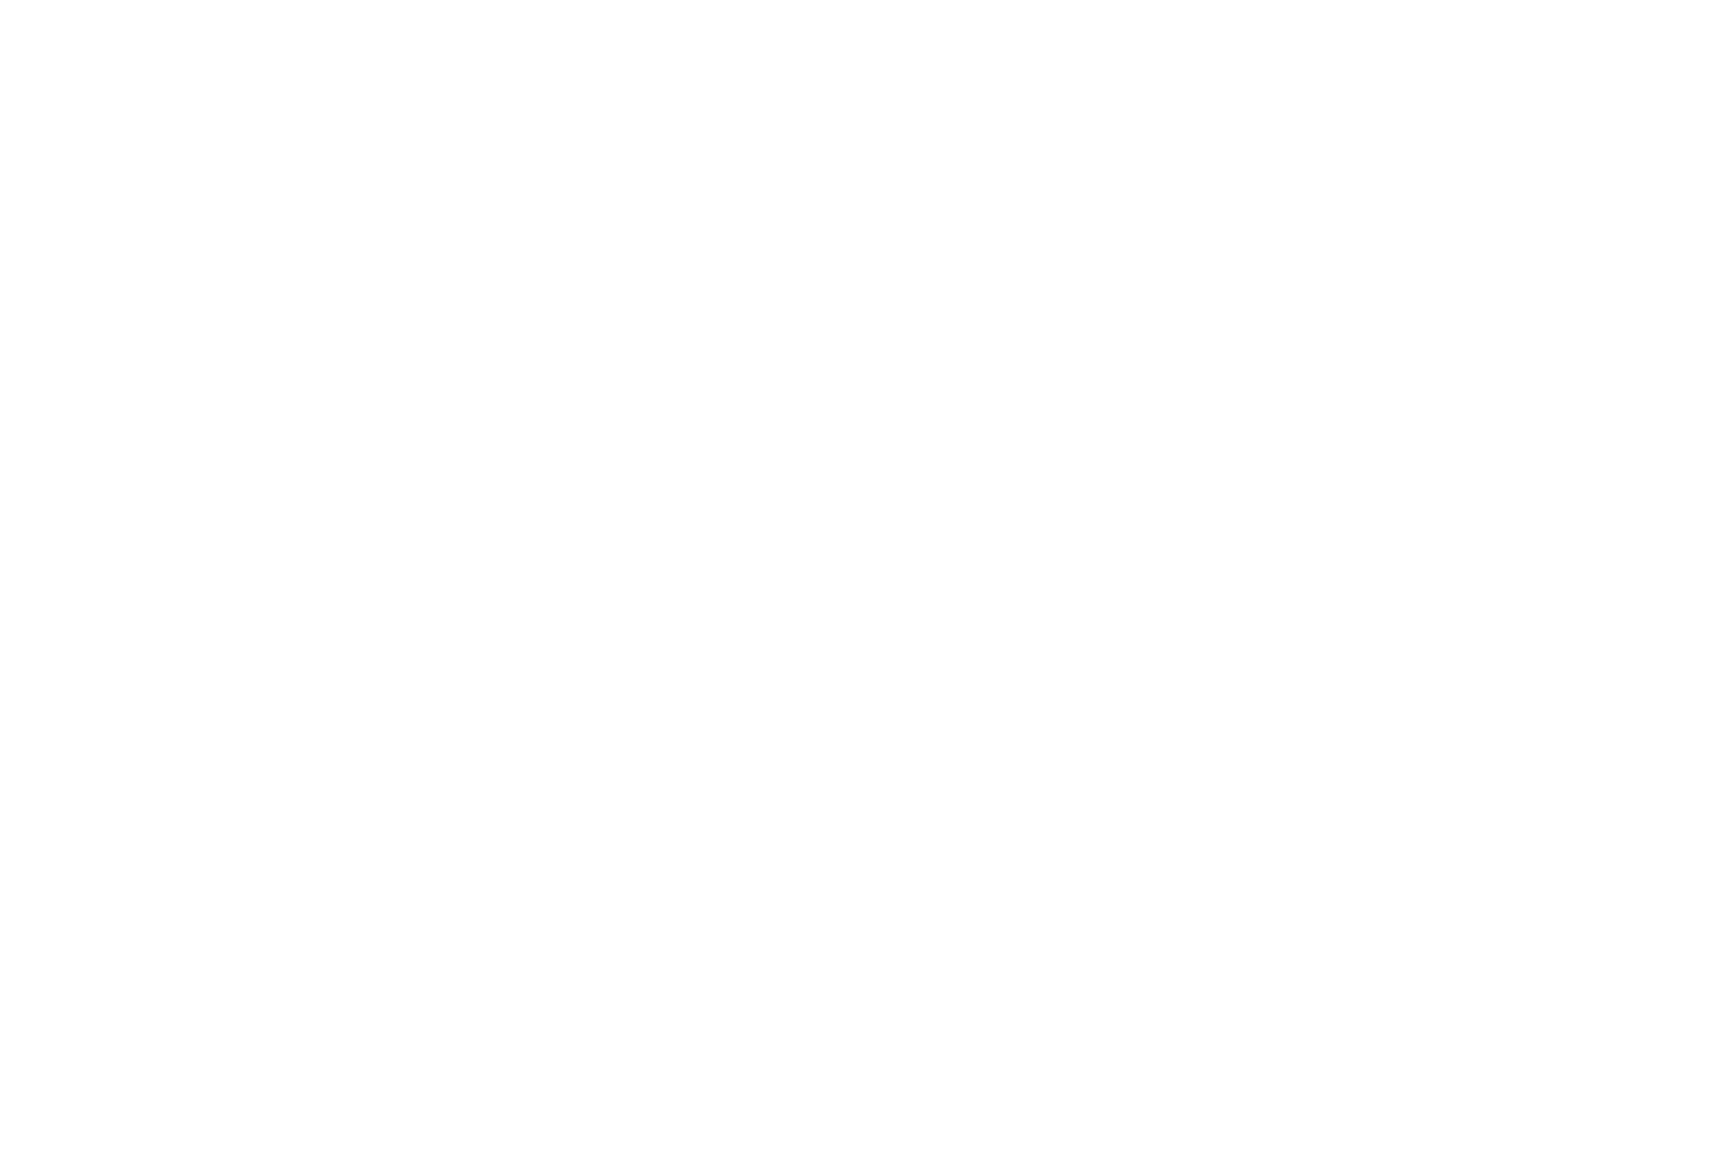 OFFICIAL SELECTION Fuoricampo FilmFest 2023 White logo